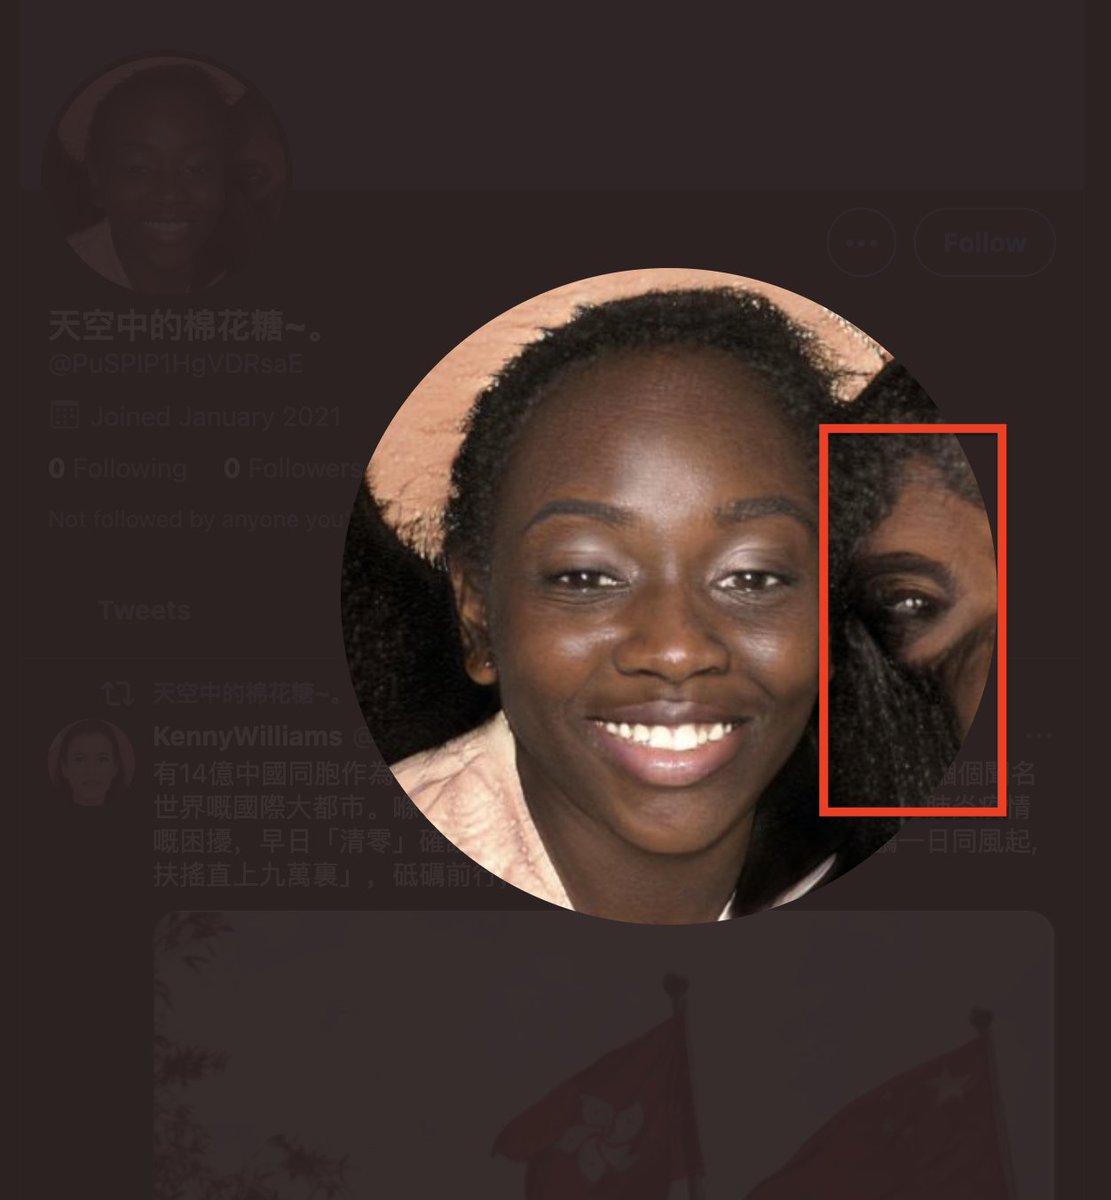 Going through some of the profile pictures we can see the sure signs that they are GAN-generated images. For instance, check out the blurring/irregularities in these. More examples of these can be found at  https://thispersondoesnotexist.com/ 